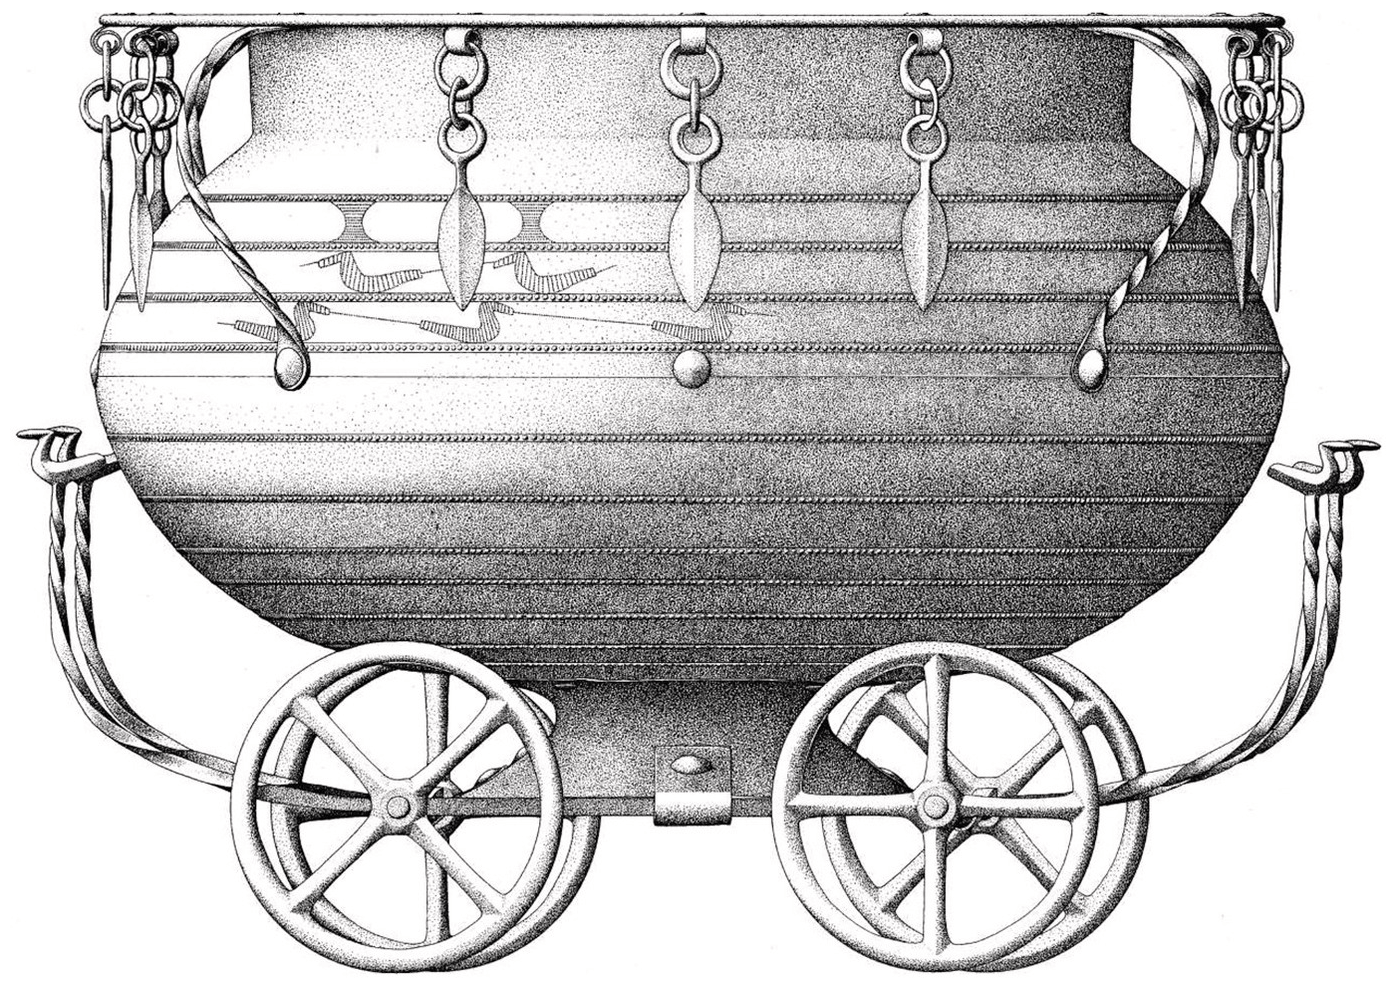 Skallerup cult wagon from Trudshøj, Denmark (1300 BC - 1100 BC). It contained ashes and bones and was found in a burial mound in a wooden coffin. An import from Eastern Central Europe.